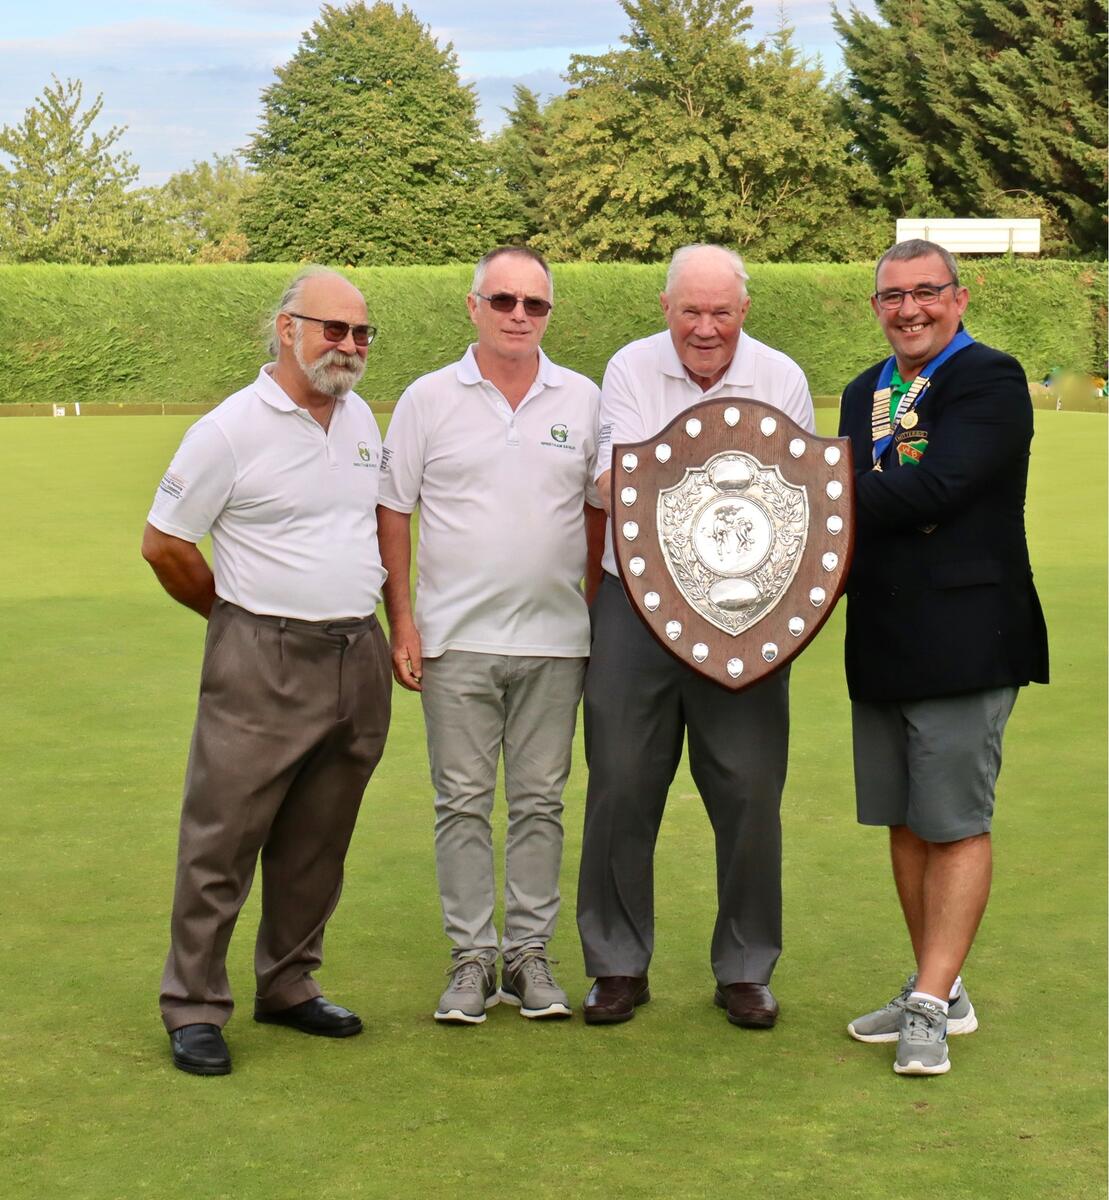 President Ally McNaughton with the winners of the Duncomb Shield 2022, Greetham Valley Eagles A. From the left: Bruce Strickland, Peter Wood, Frank Hinch, Ally McNaughton.